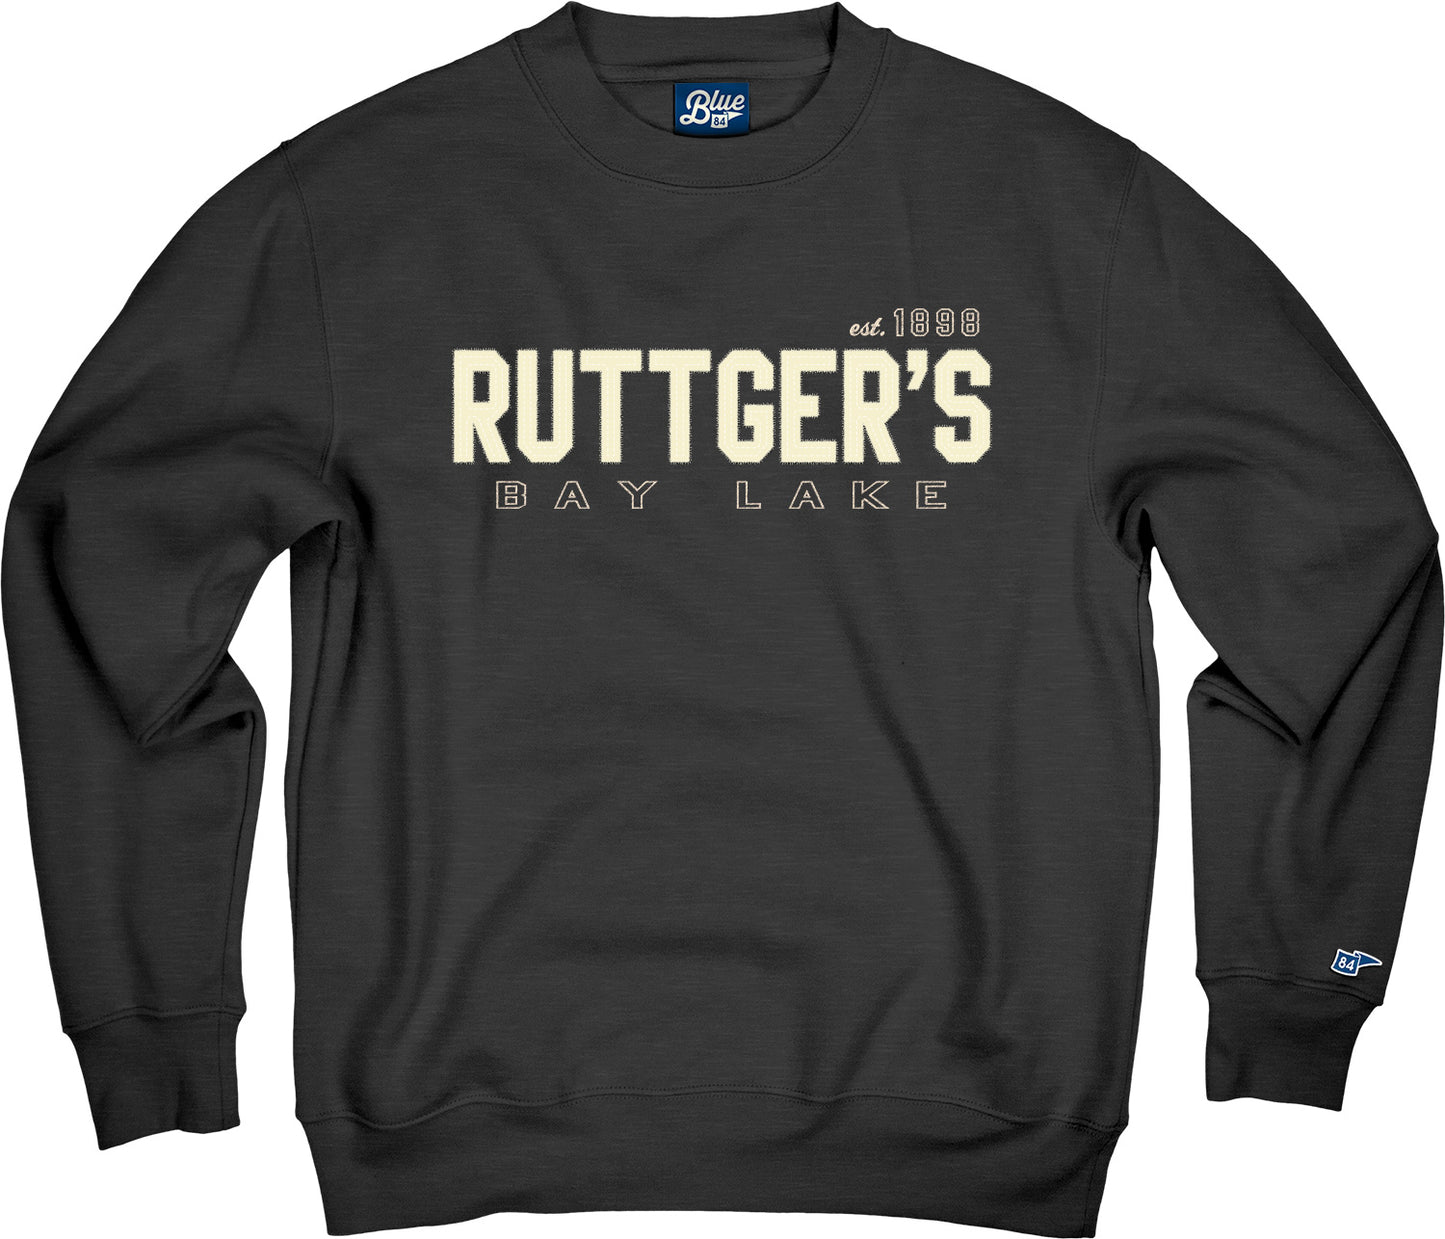 Ruttger's Campbell Crew - Charcoal with Gold Lettering